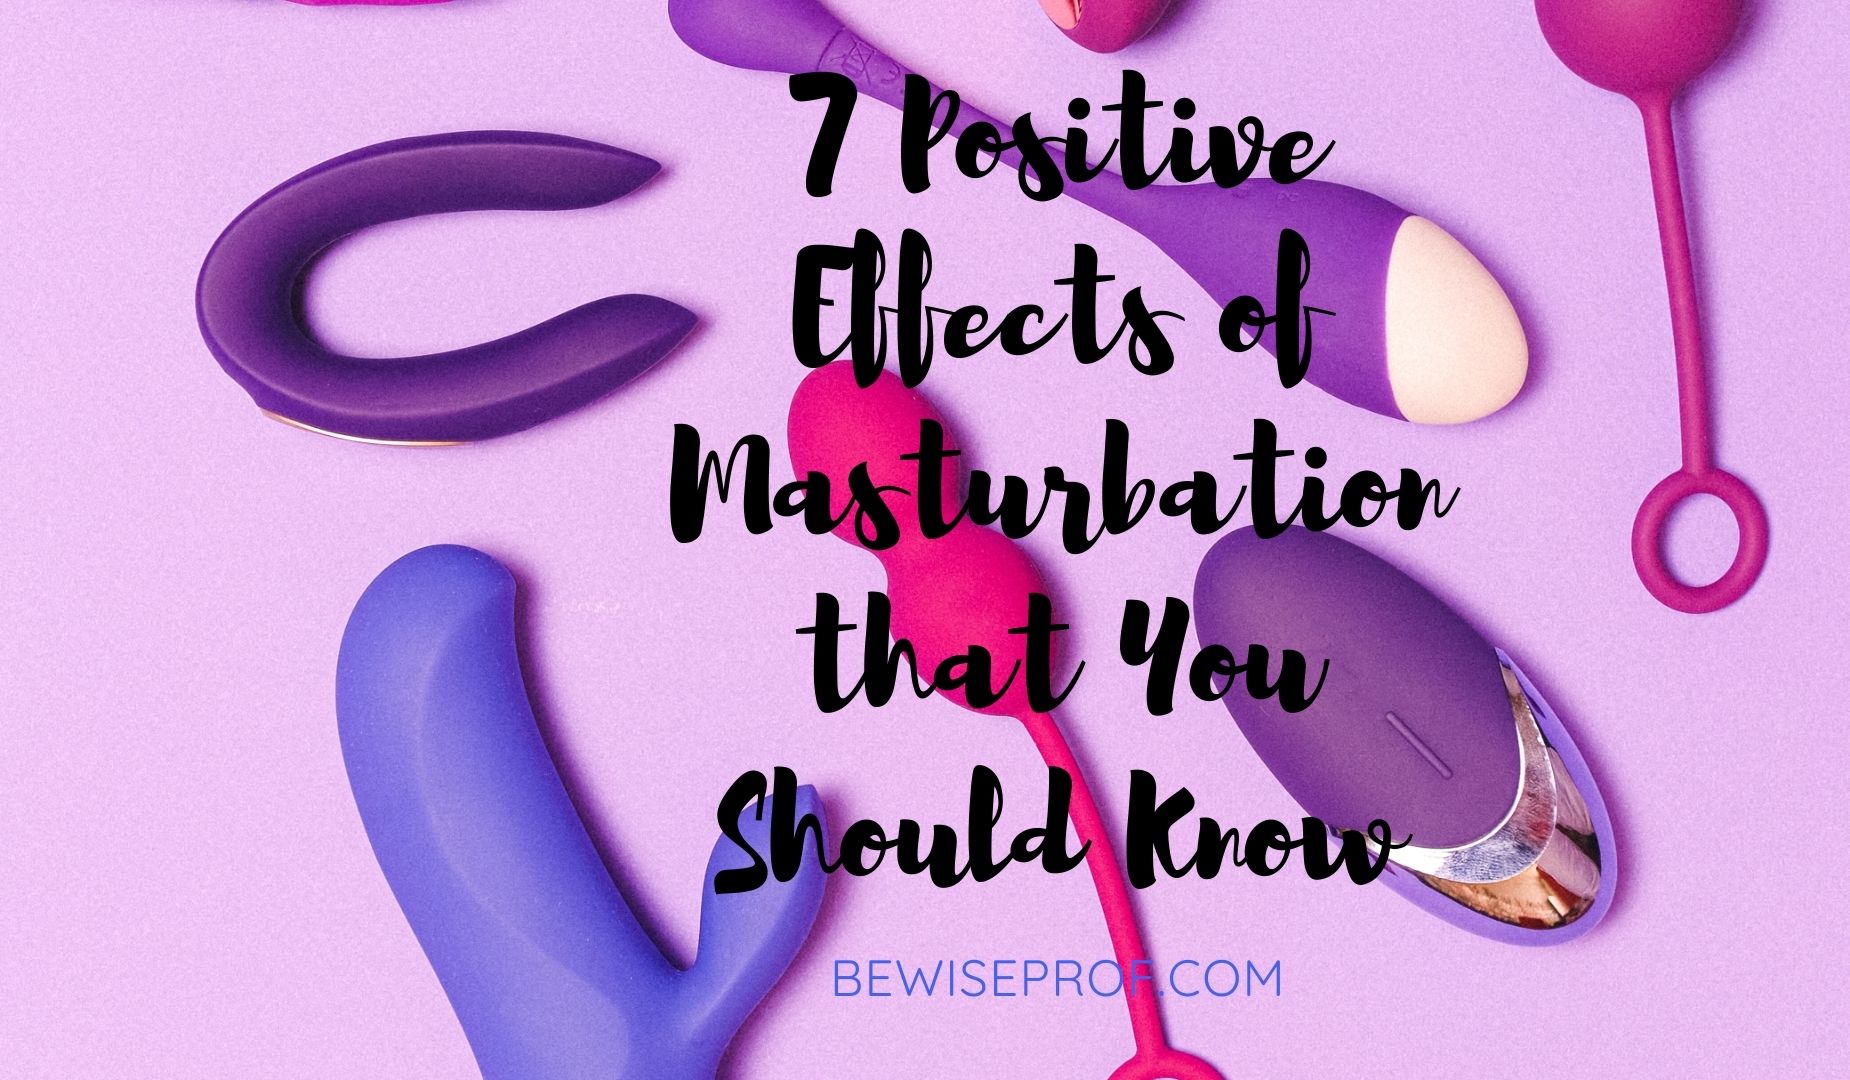 7 Positive Effects of Masturbation that You Should Know